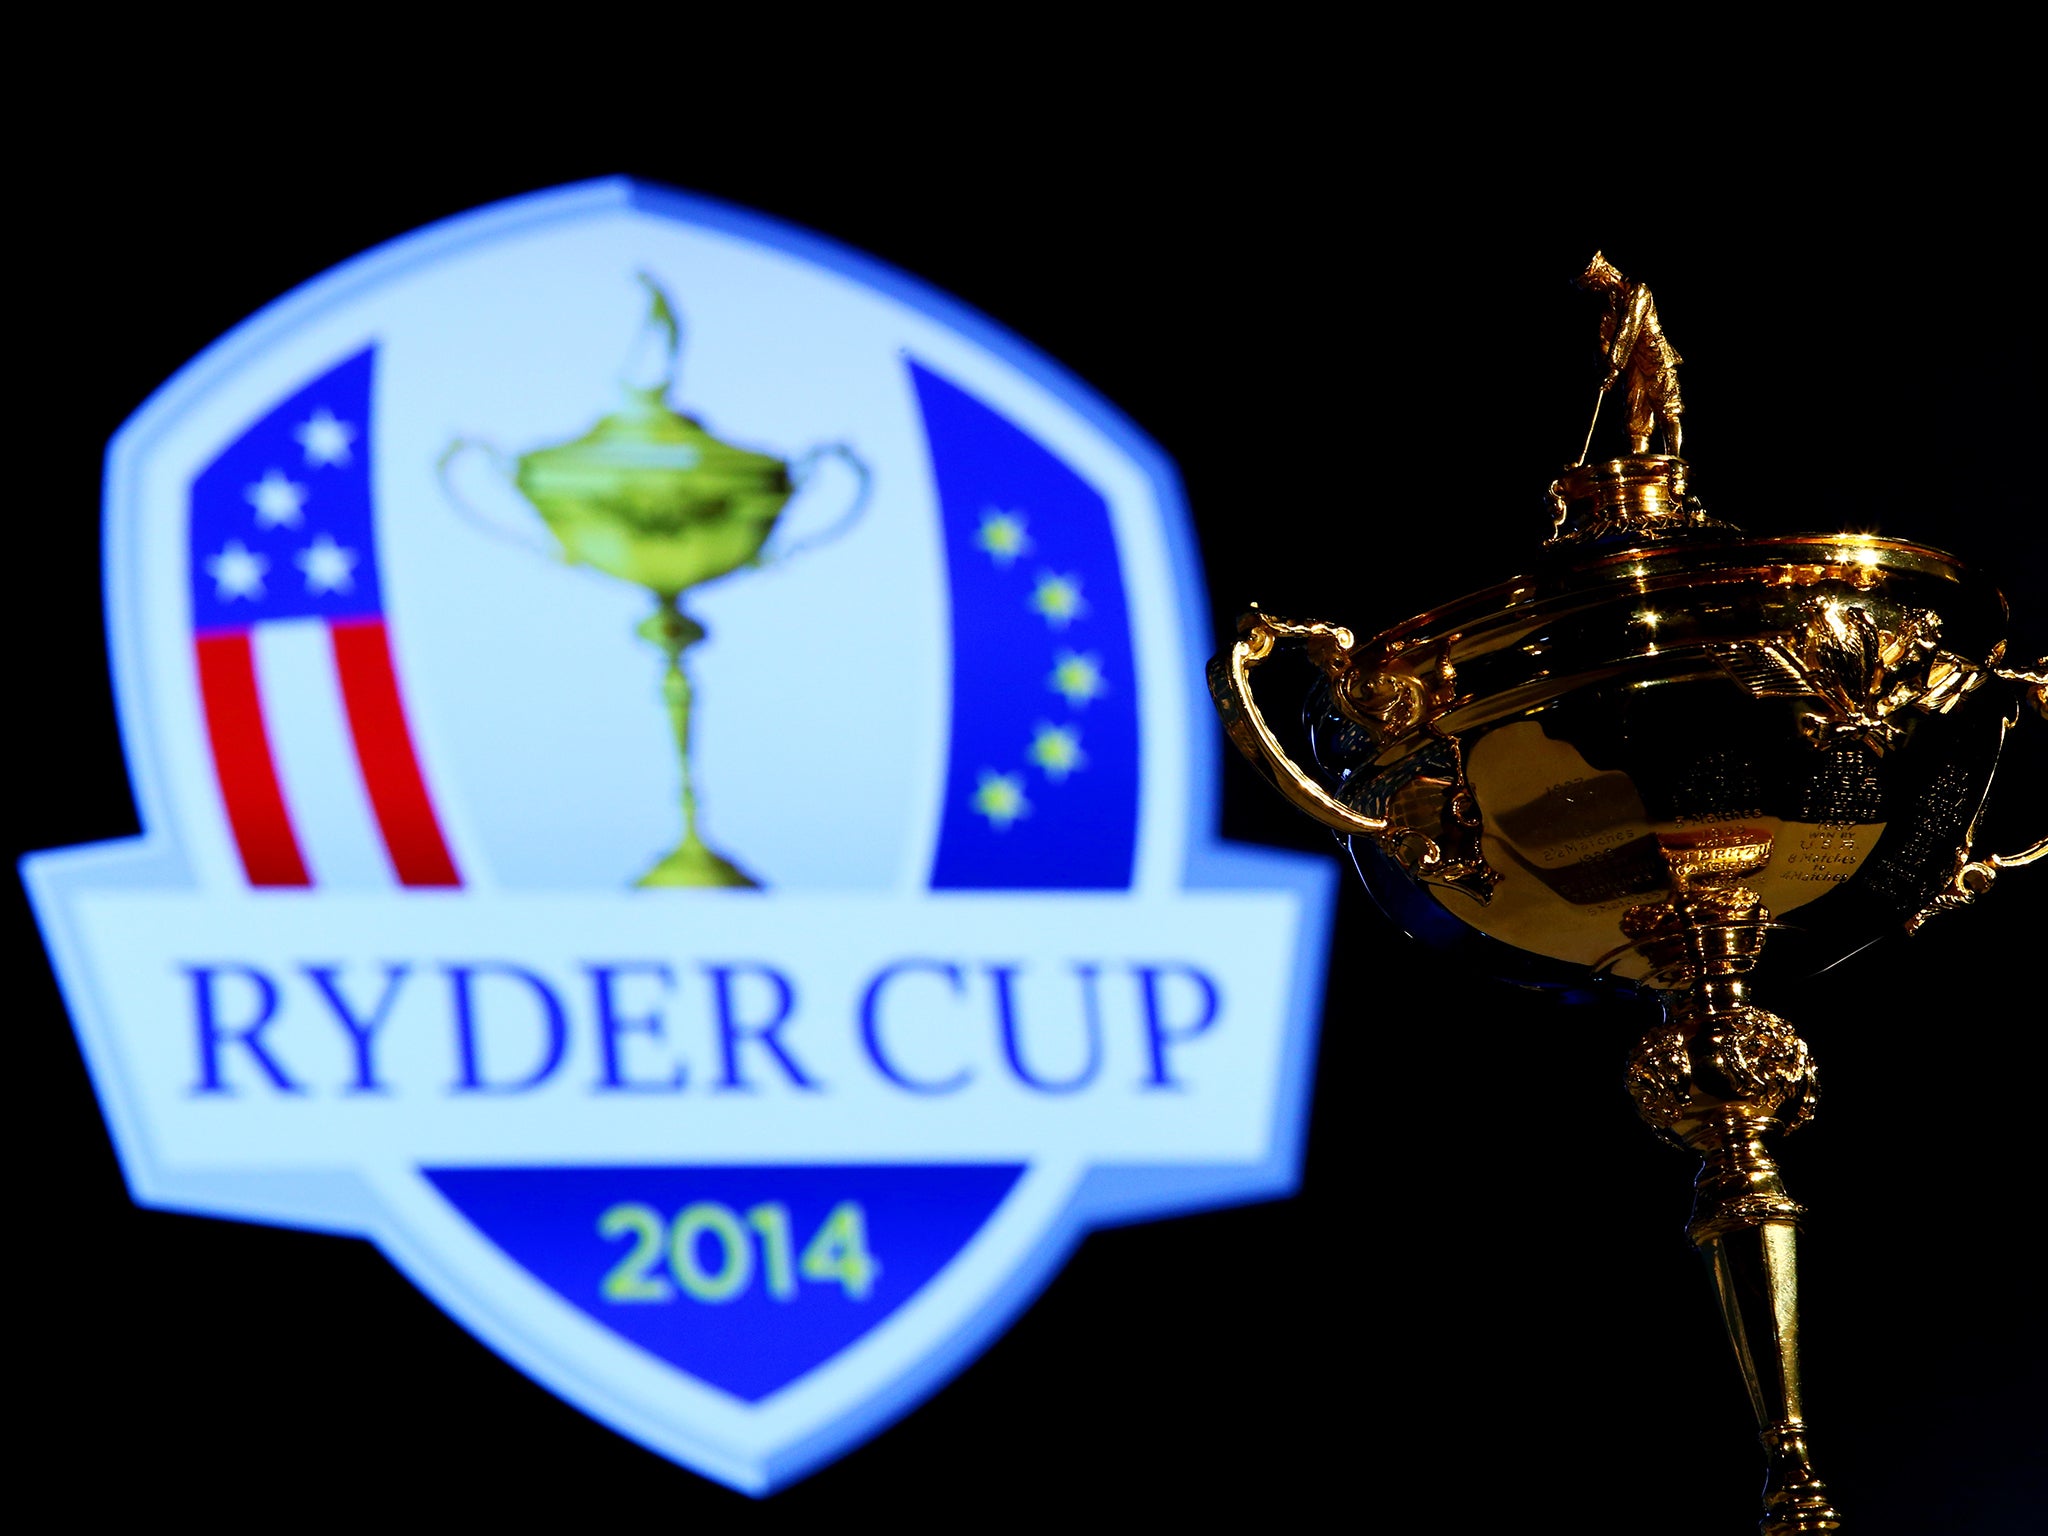 A view of the Ryder Cup